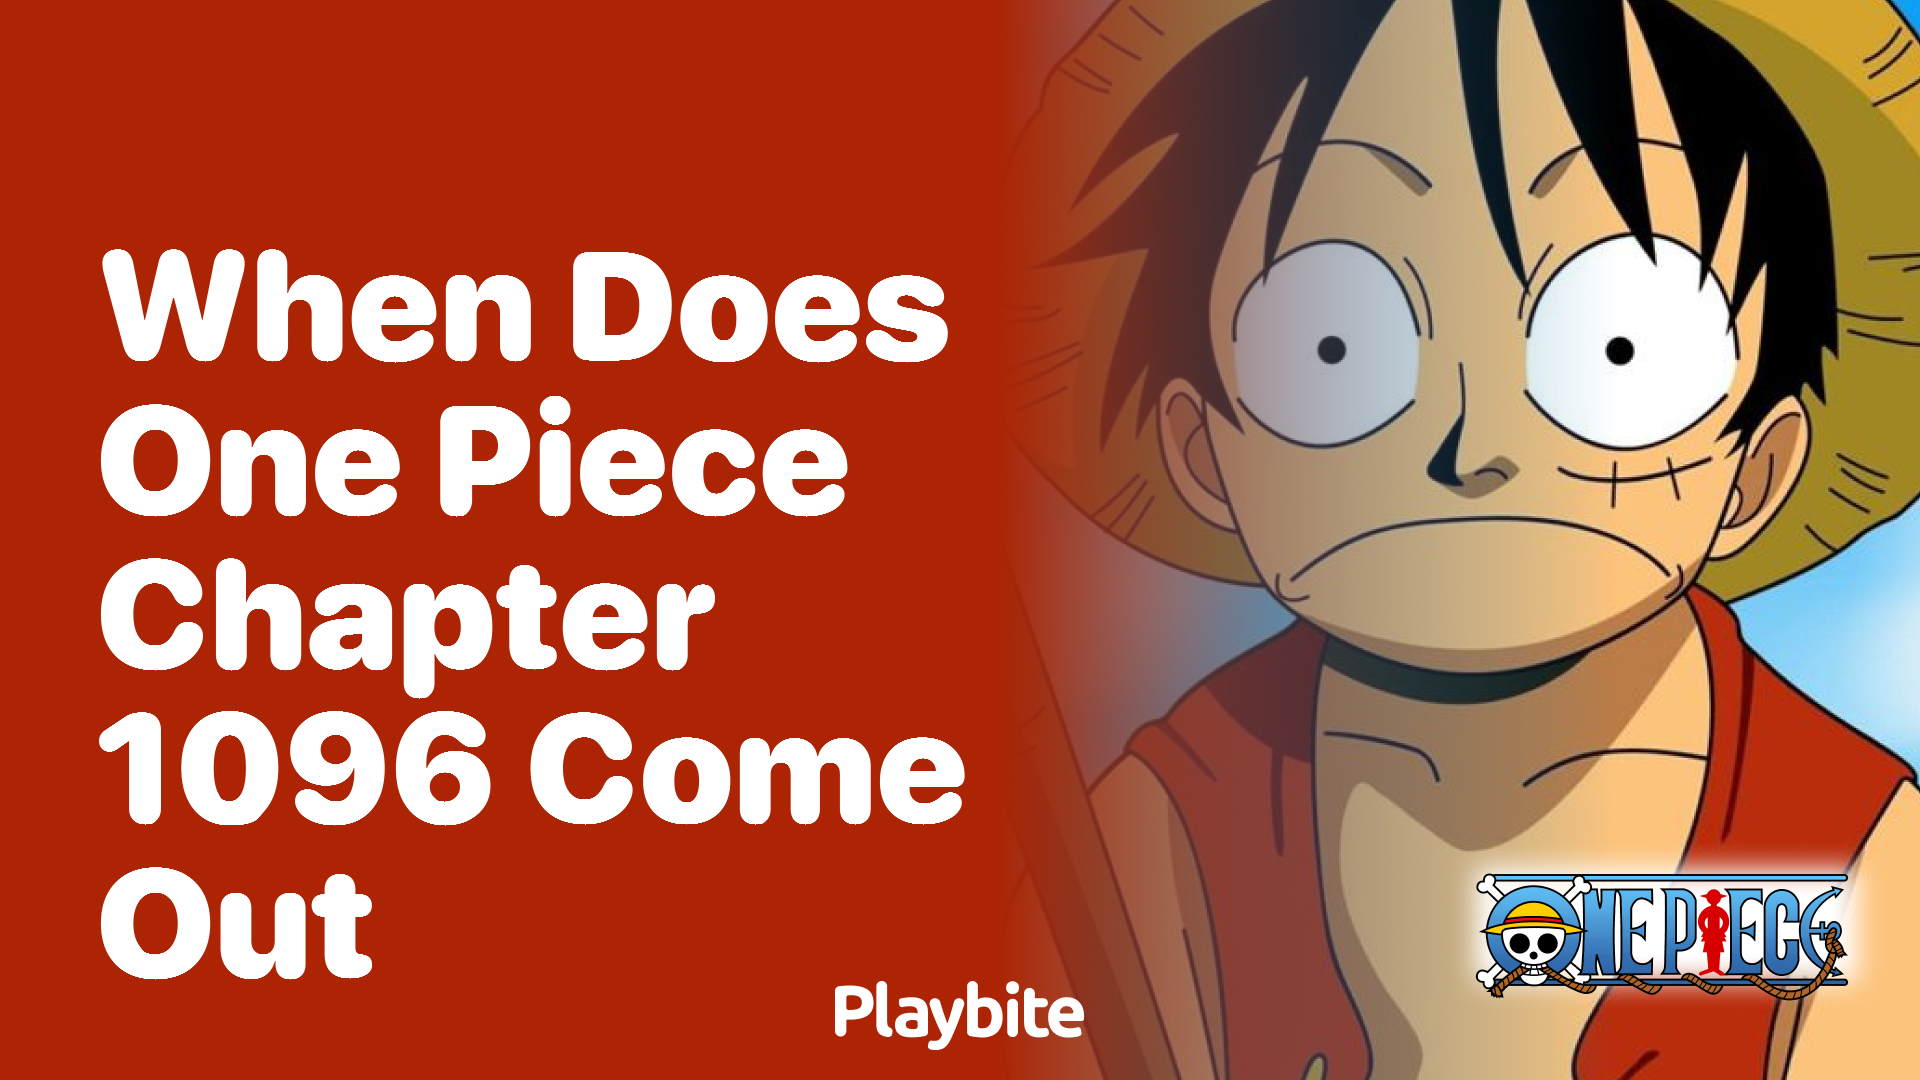 When does One Piece chapter 1096 come out?